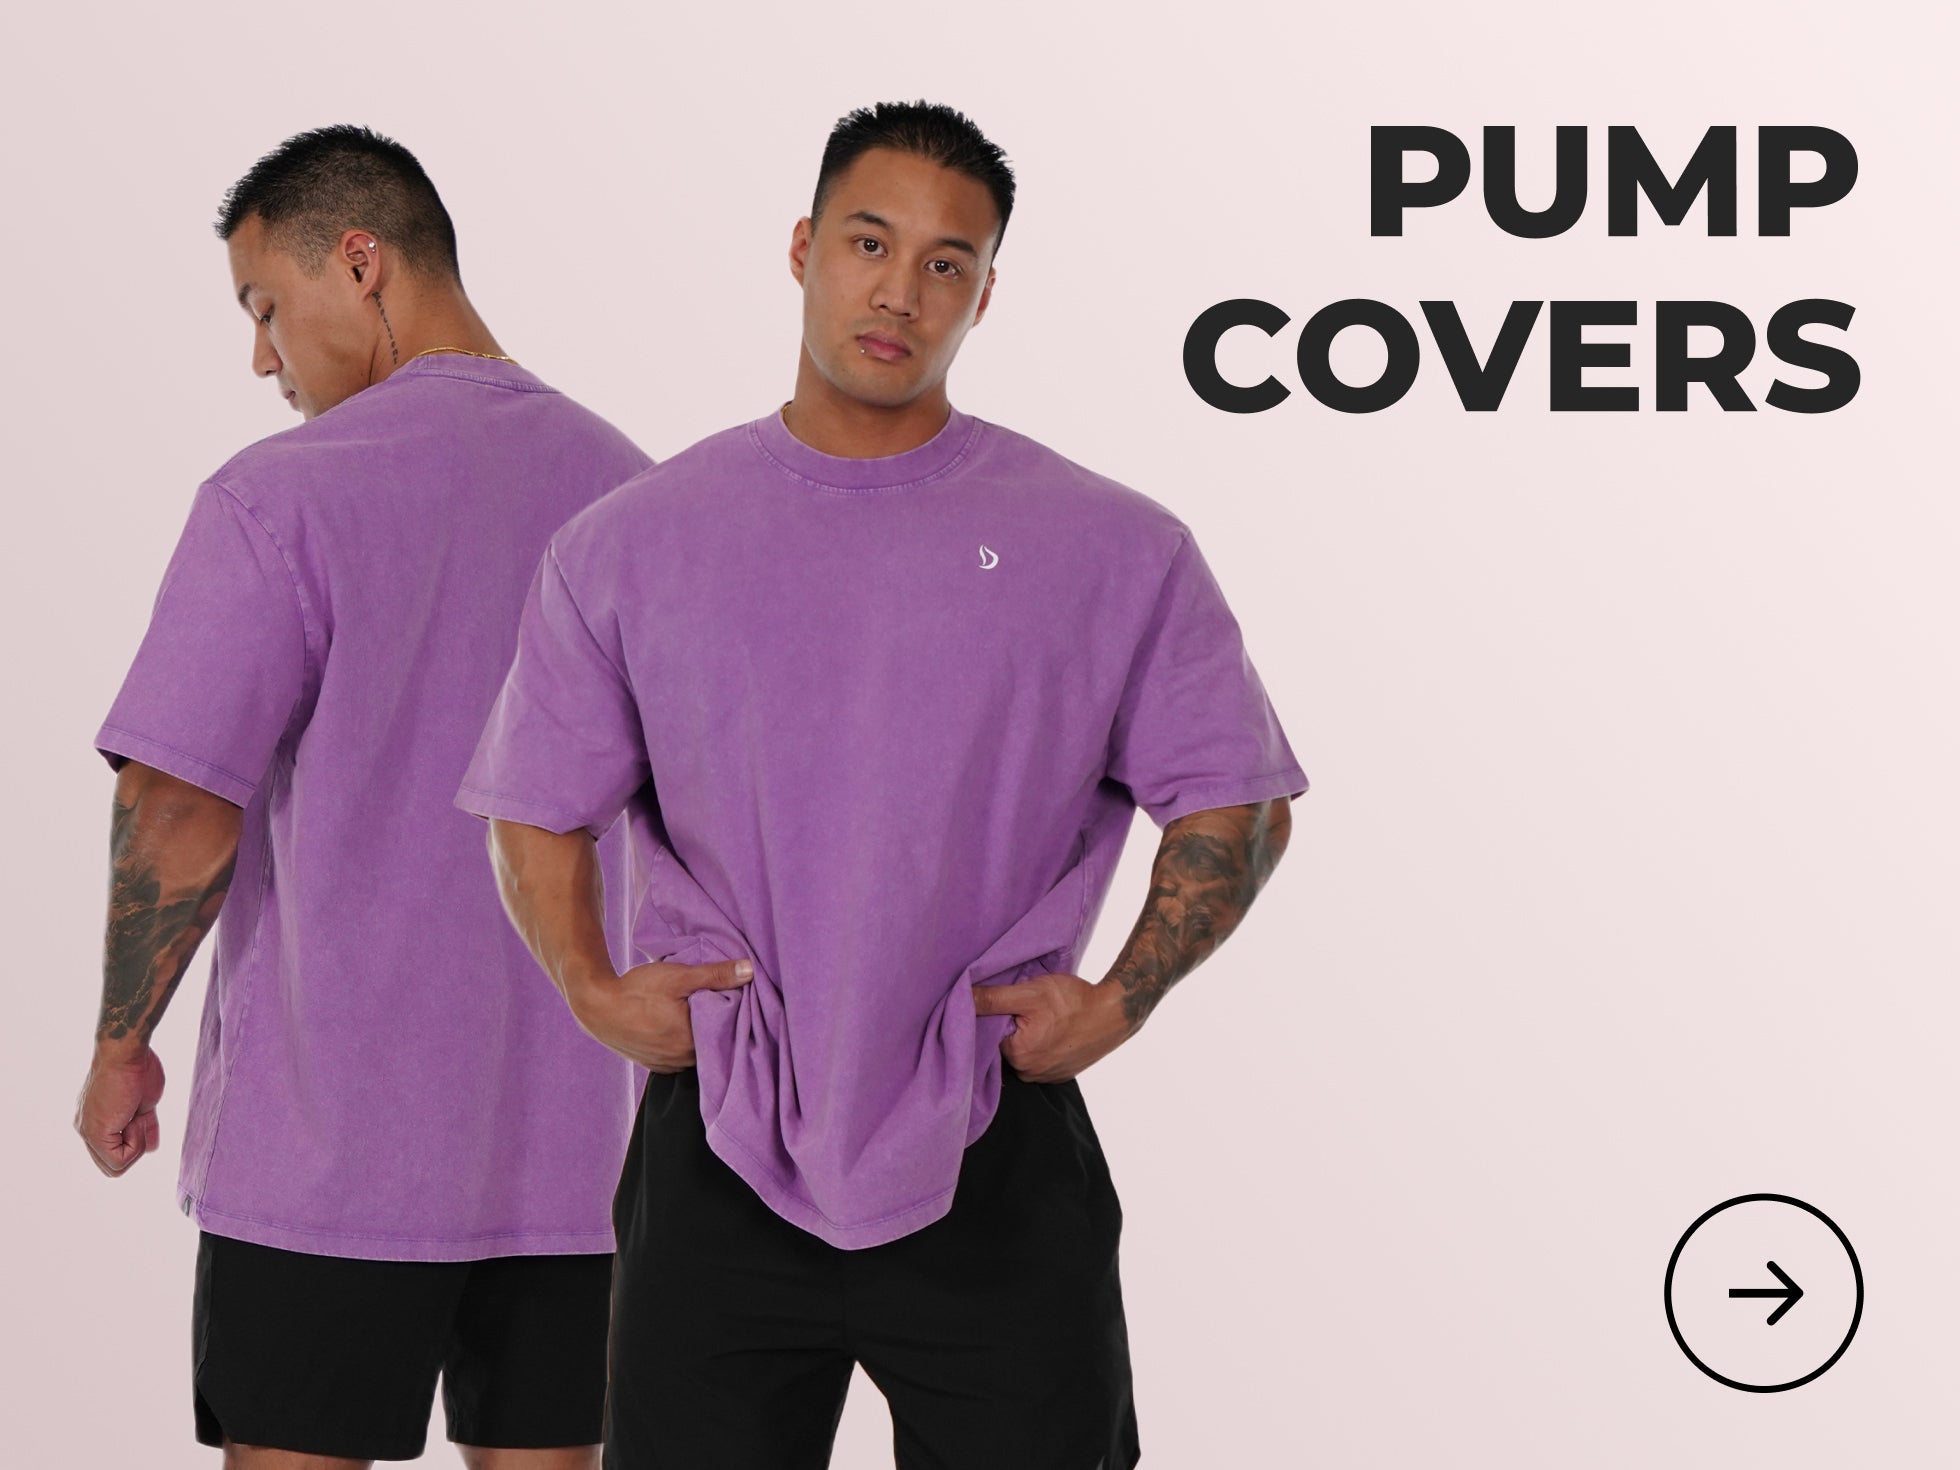 Devoteewear's best oversized T-shirts and pump covers for the gym. Shop comfortable and stylish T-shirts for gym. Best activewear Canada.